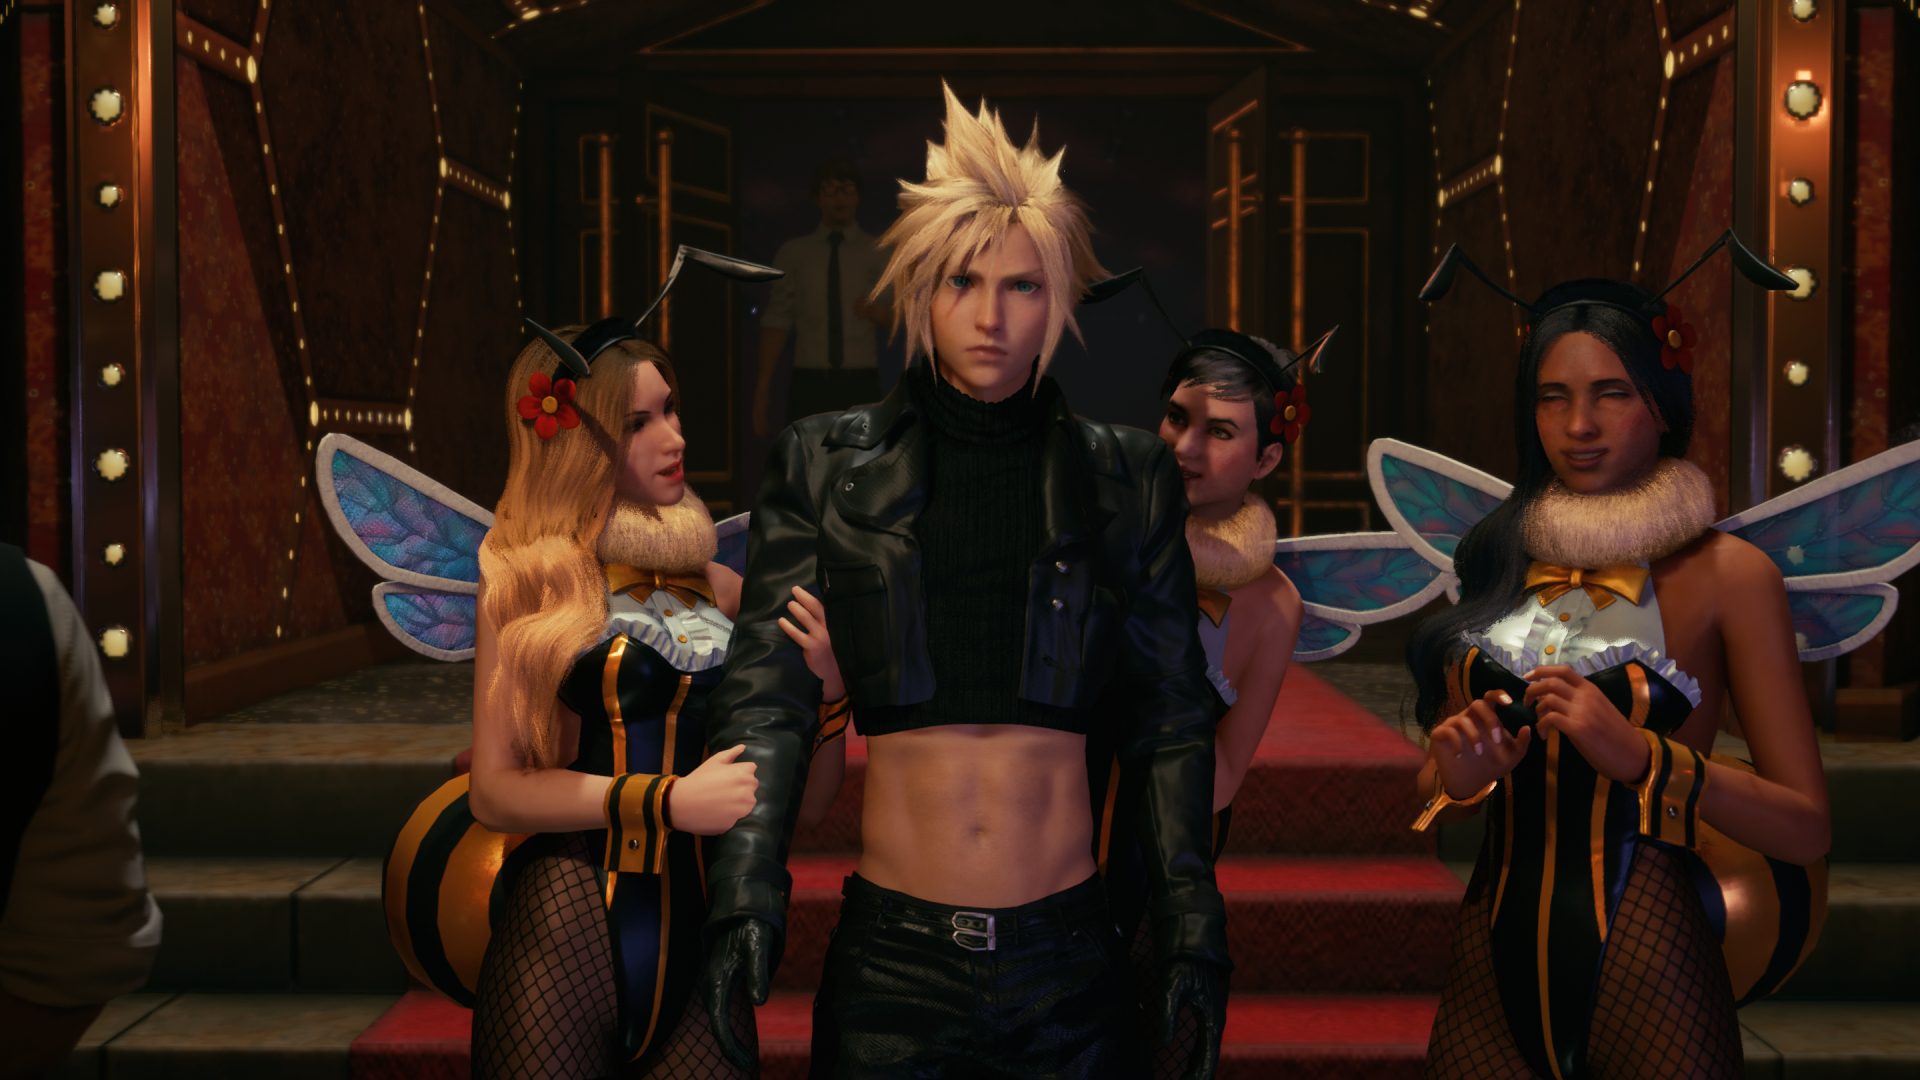 Final Fantasy's Strong Links to Fashion, by C.S. Voll